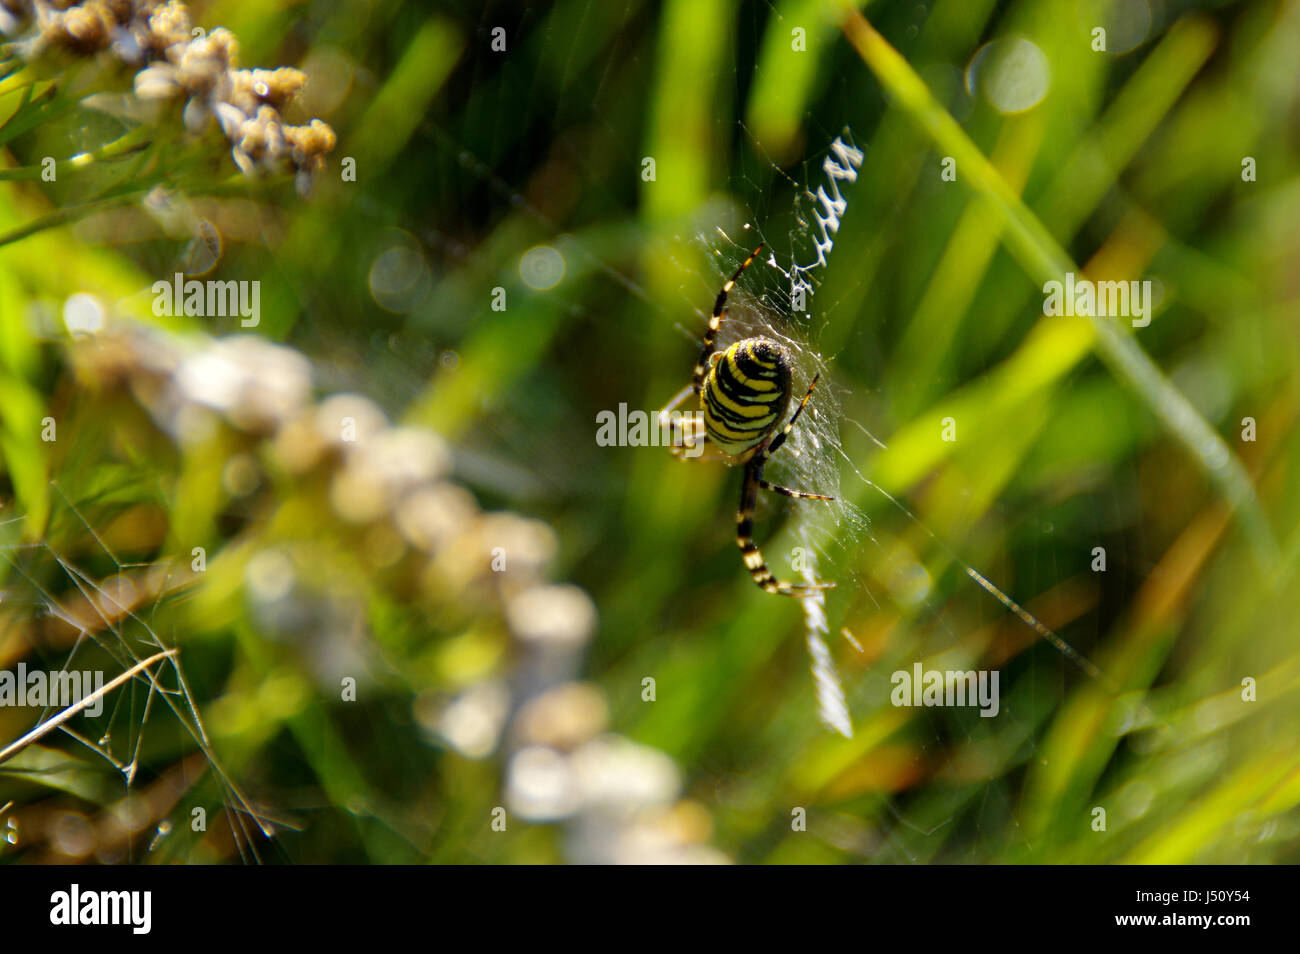 Wasp spider on web in morning light Stock Photo